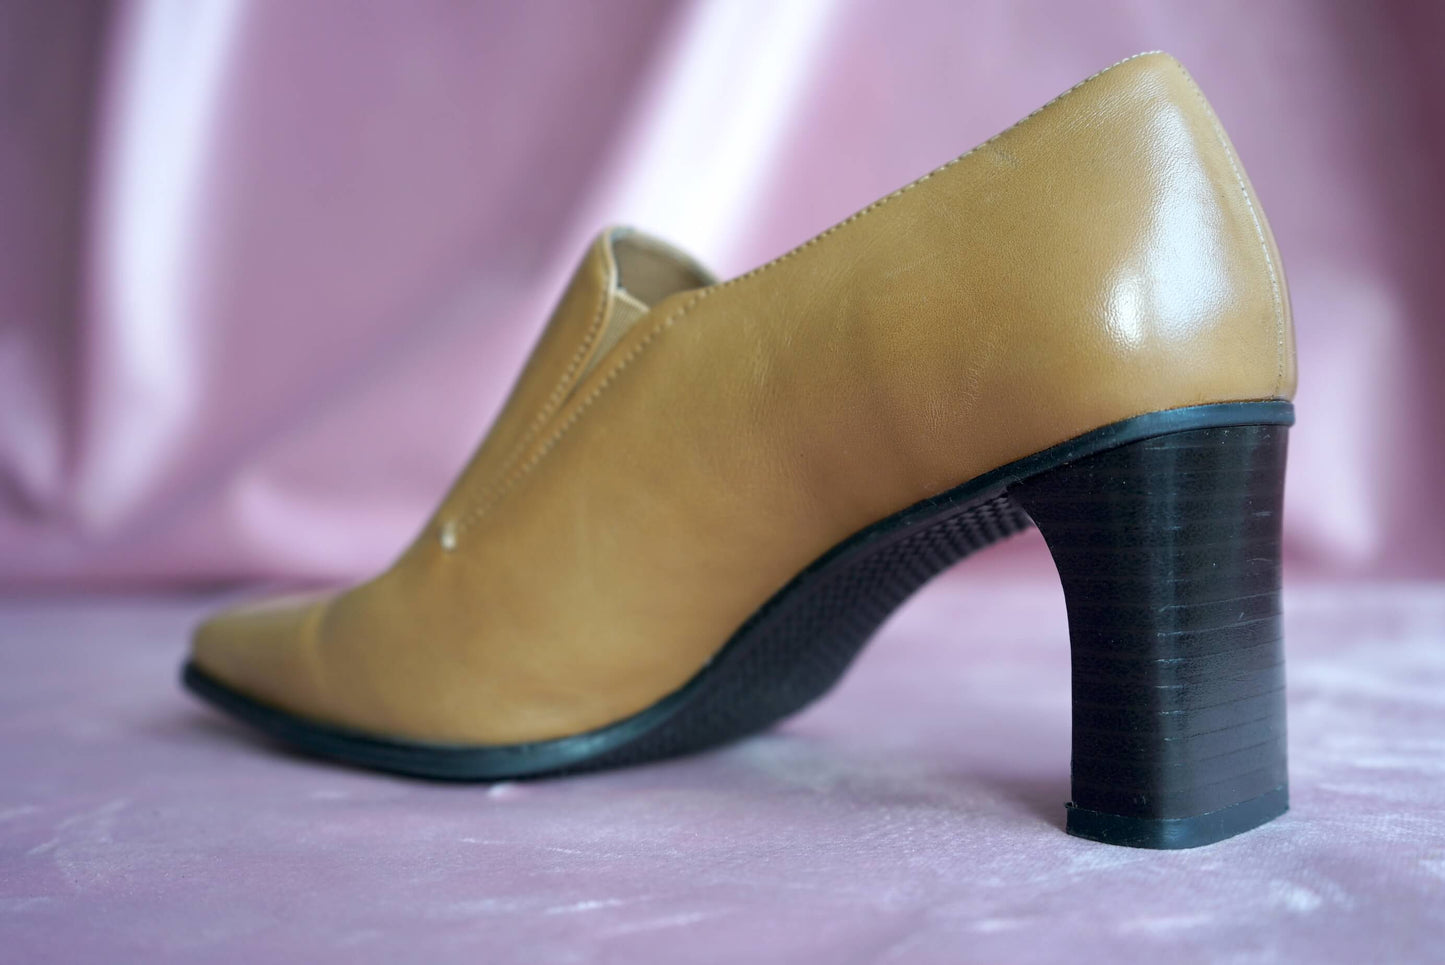 Vintage Tanned Square-Toed Leather Heeled Shoes Size 4